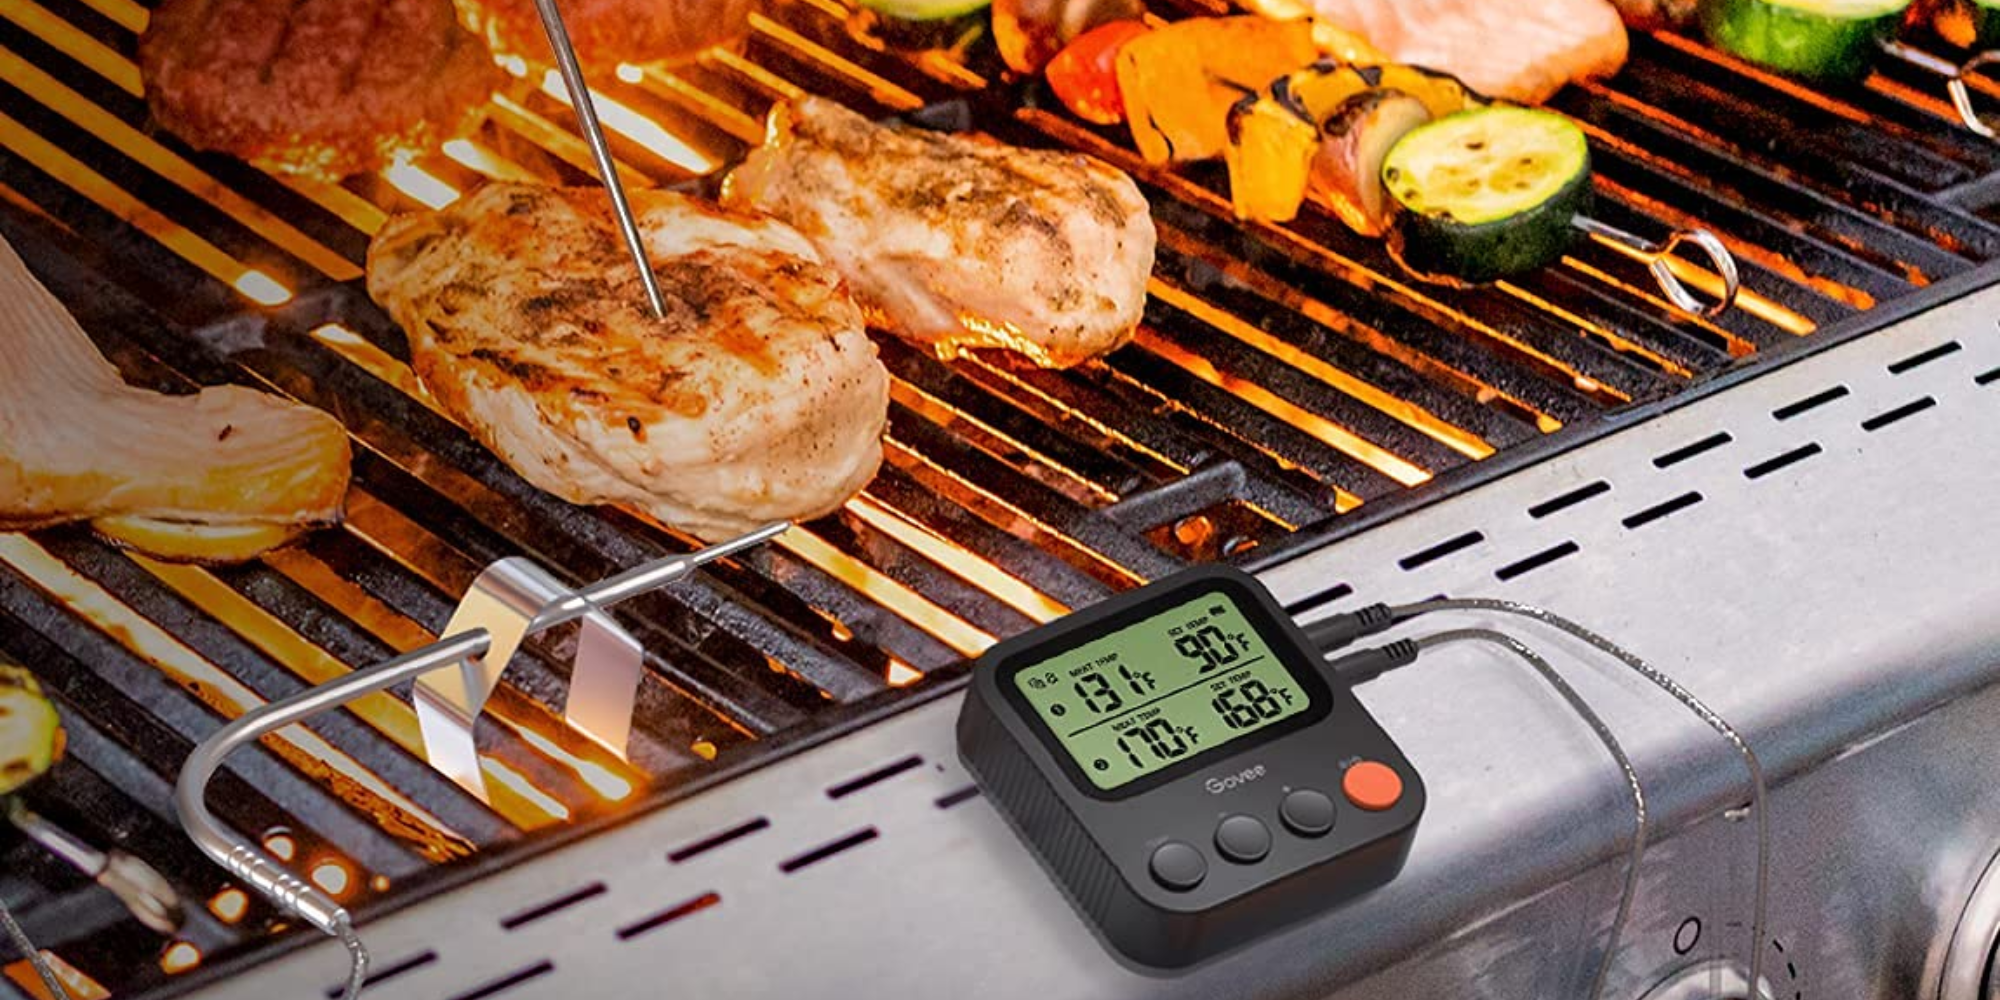 https://9to5toys.com/wp-content/uploads/sites/5/2021/06/govee-meat-grilling-thermometer.png